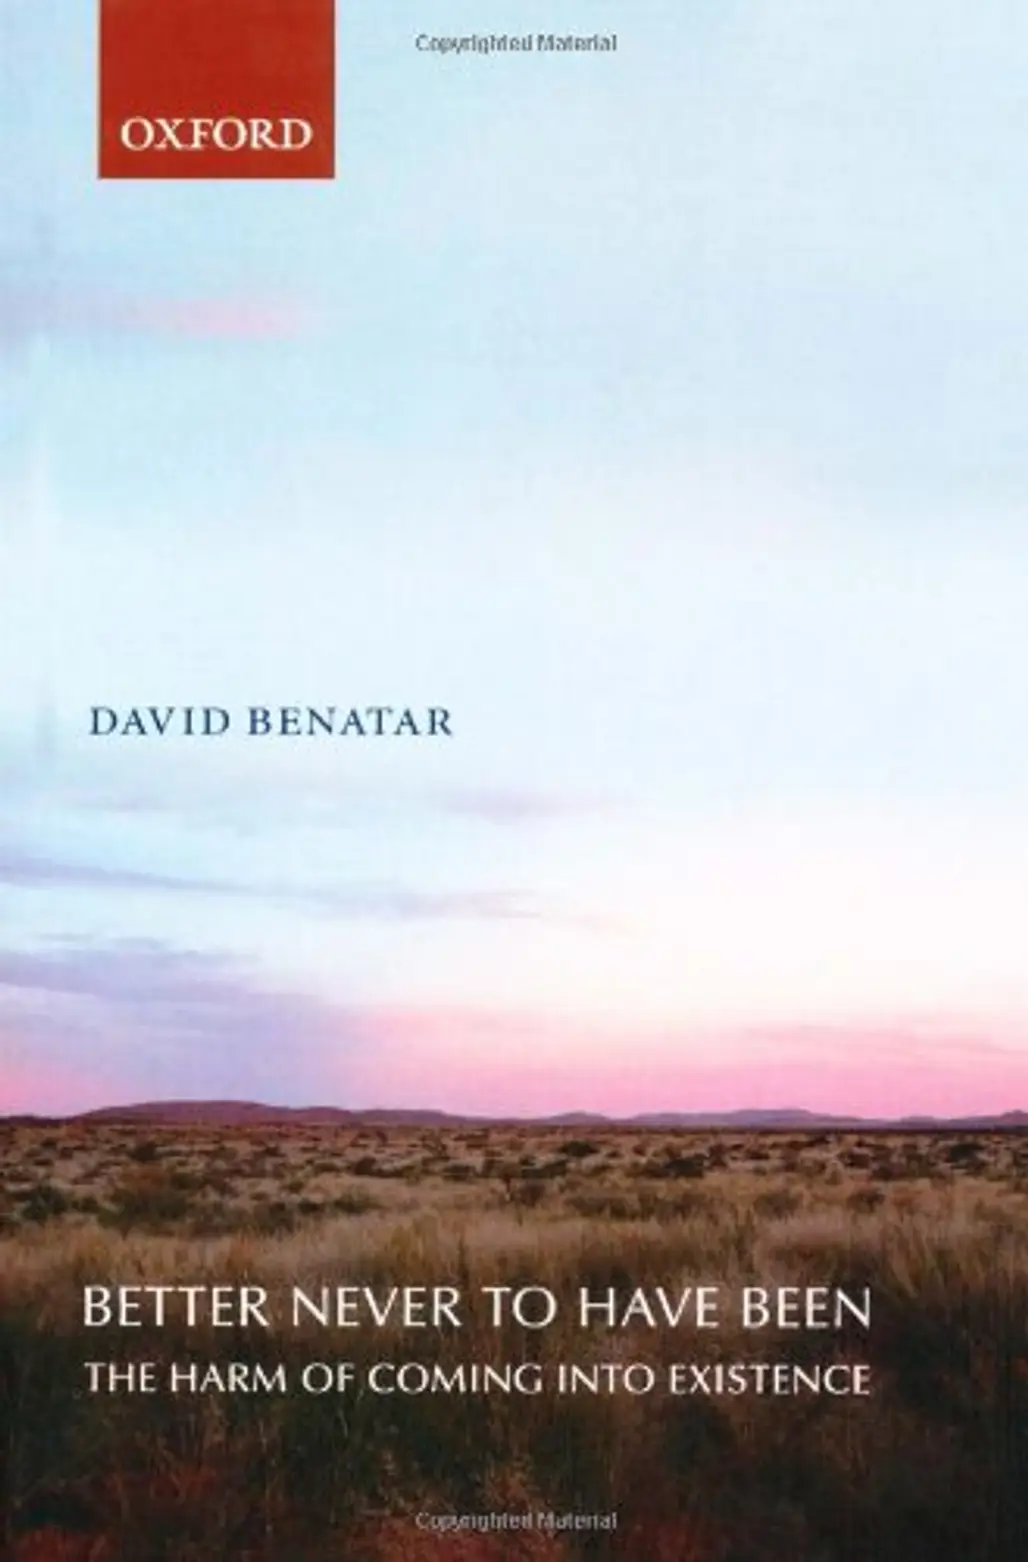 Better Never to Have Been: the Harm of Coming into Existence by David Benetar